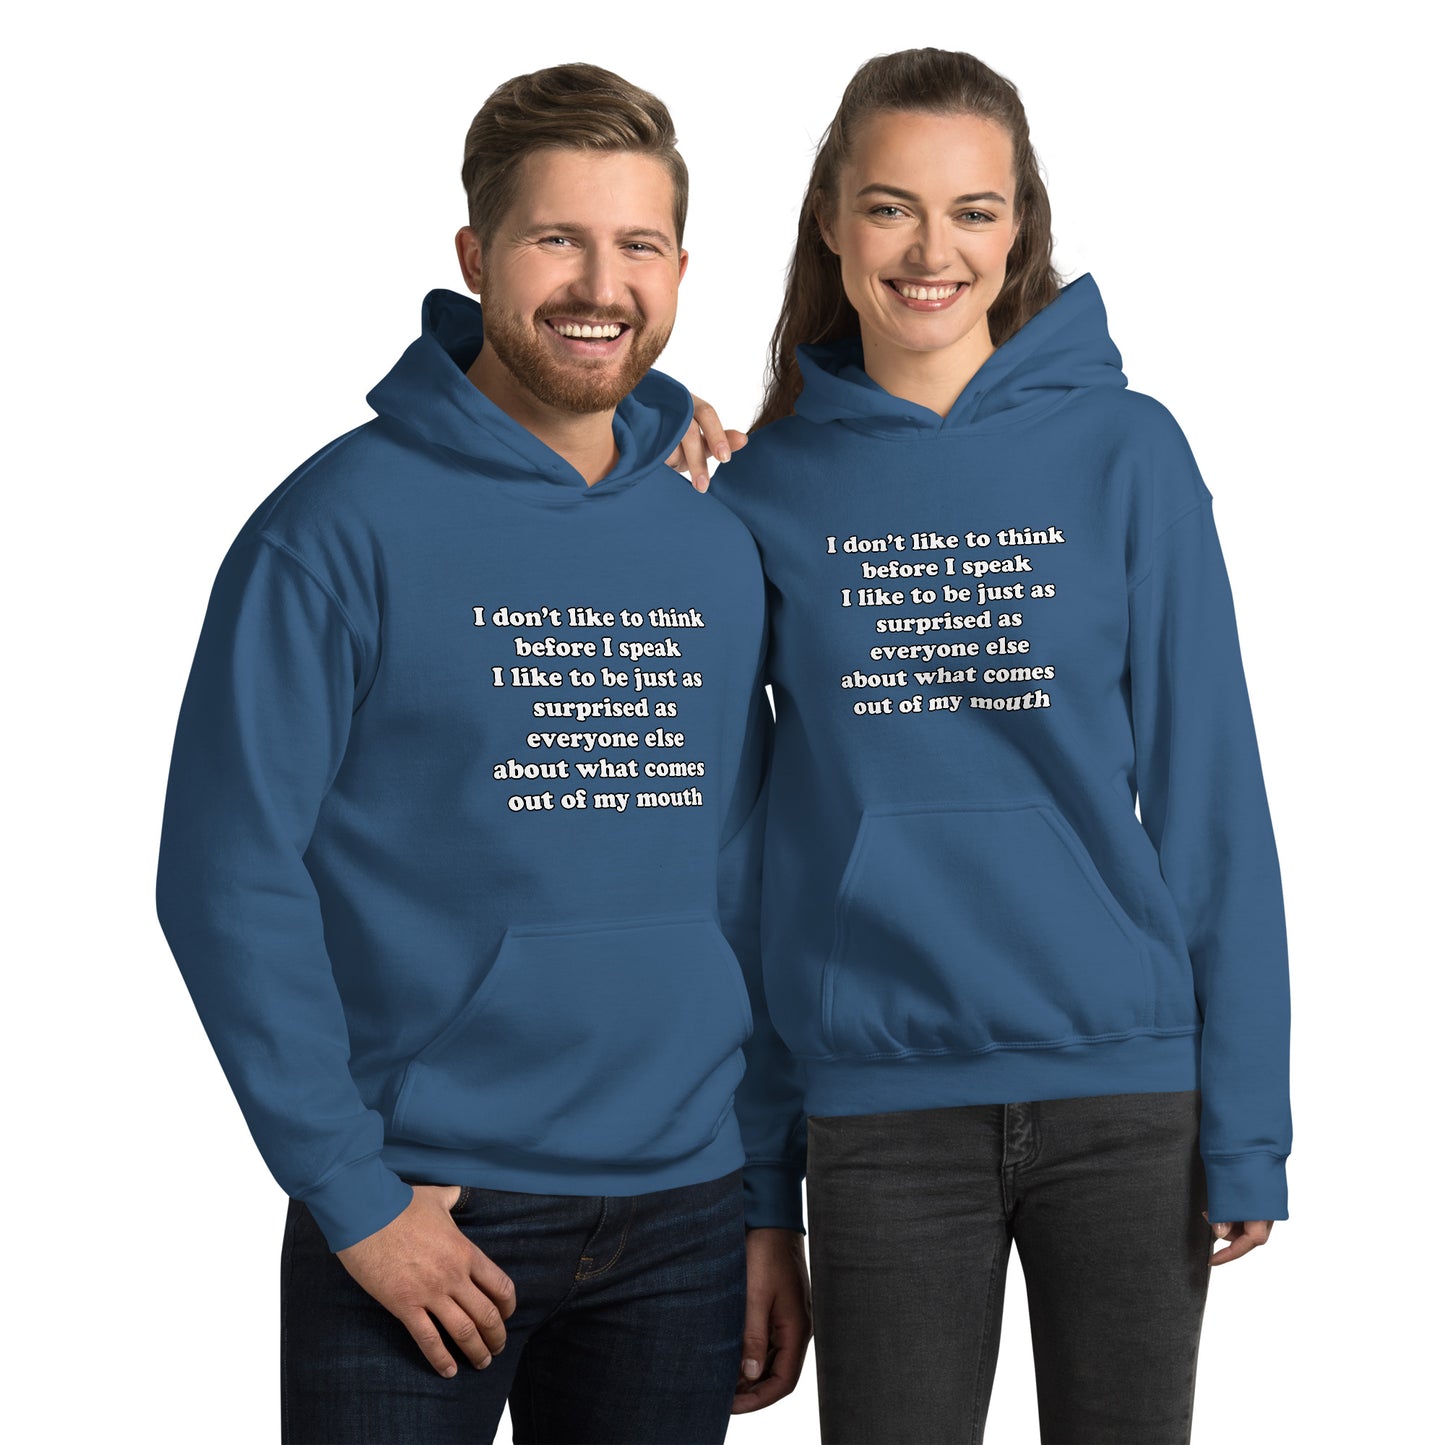 Man and woman with indigo blue hoodie with text “I don't think before I speak Just as serprised as everyone about what comes out of my mouth"